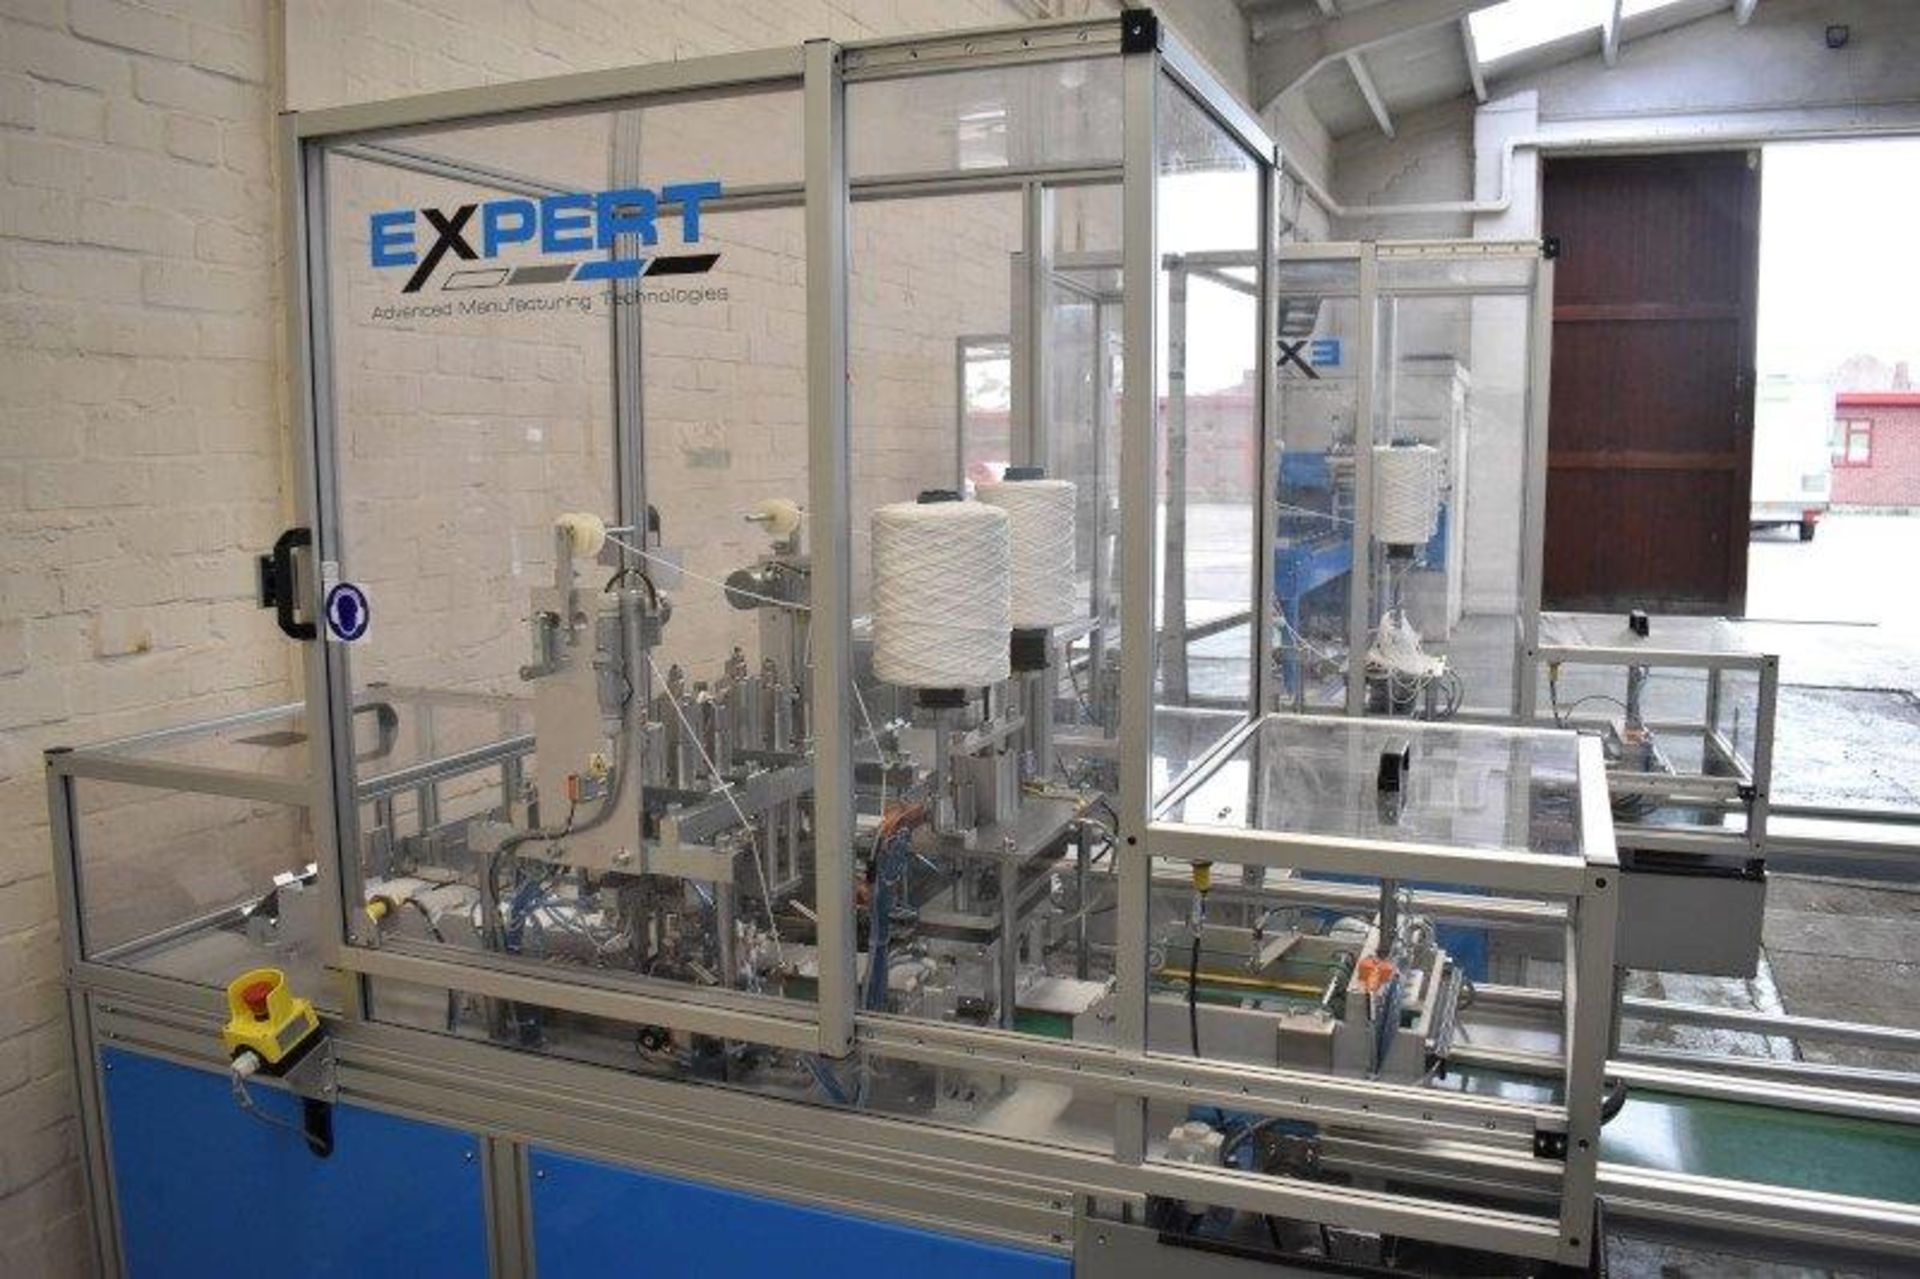 Expert fully automated Mask Making Machine - manufactured in 2020 - Image 18 of 21